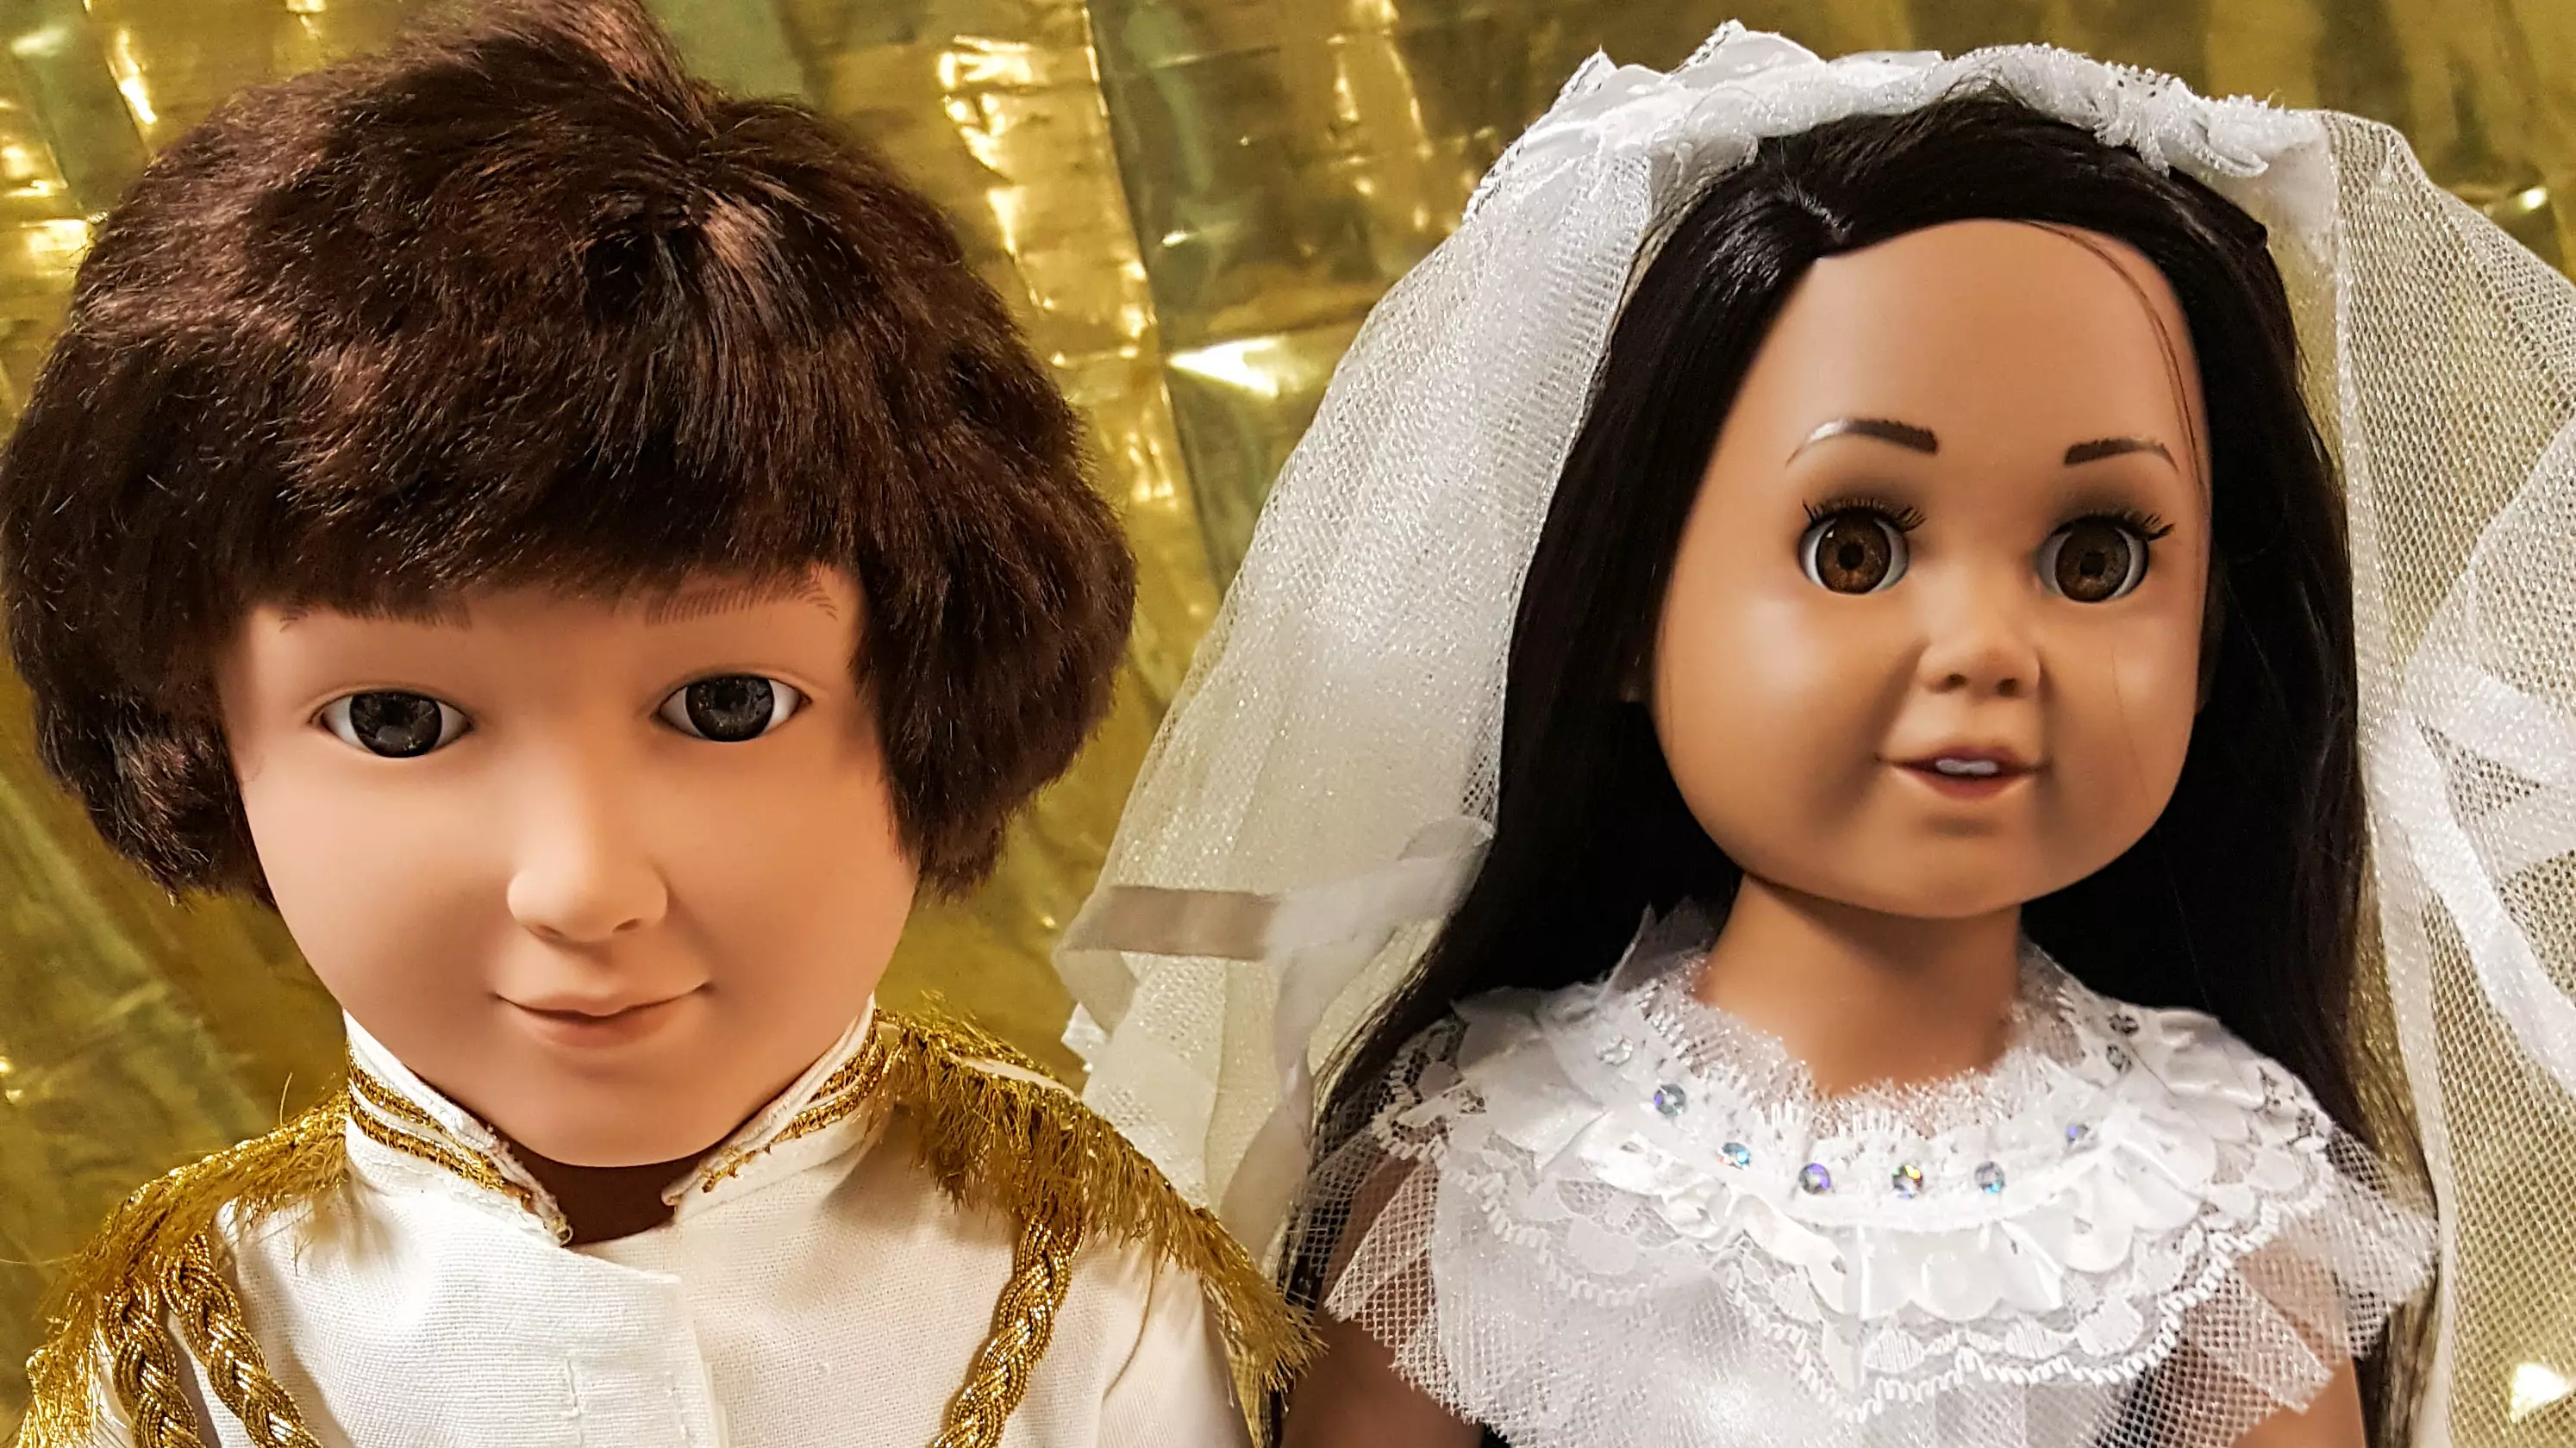 You Can Now Buy Dolls Of Meghan And Prince Harry... Sort Of